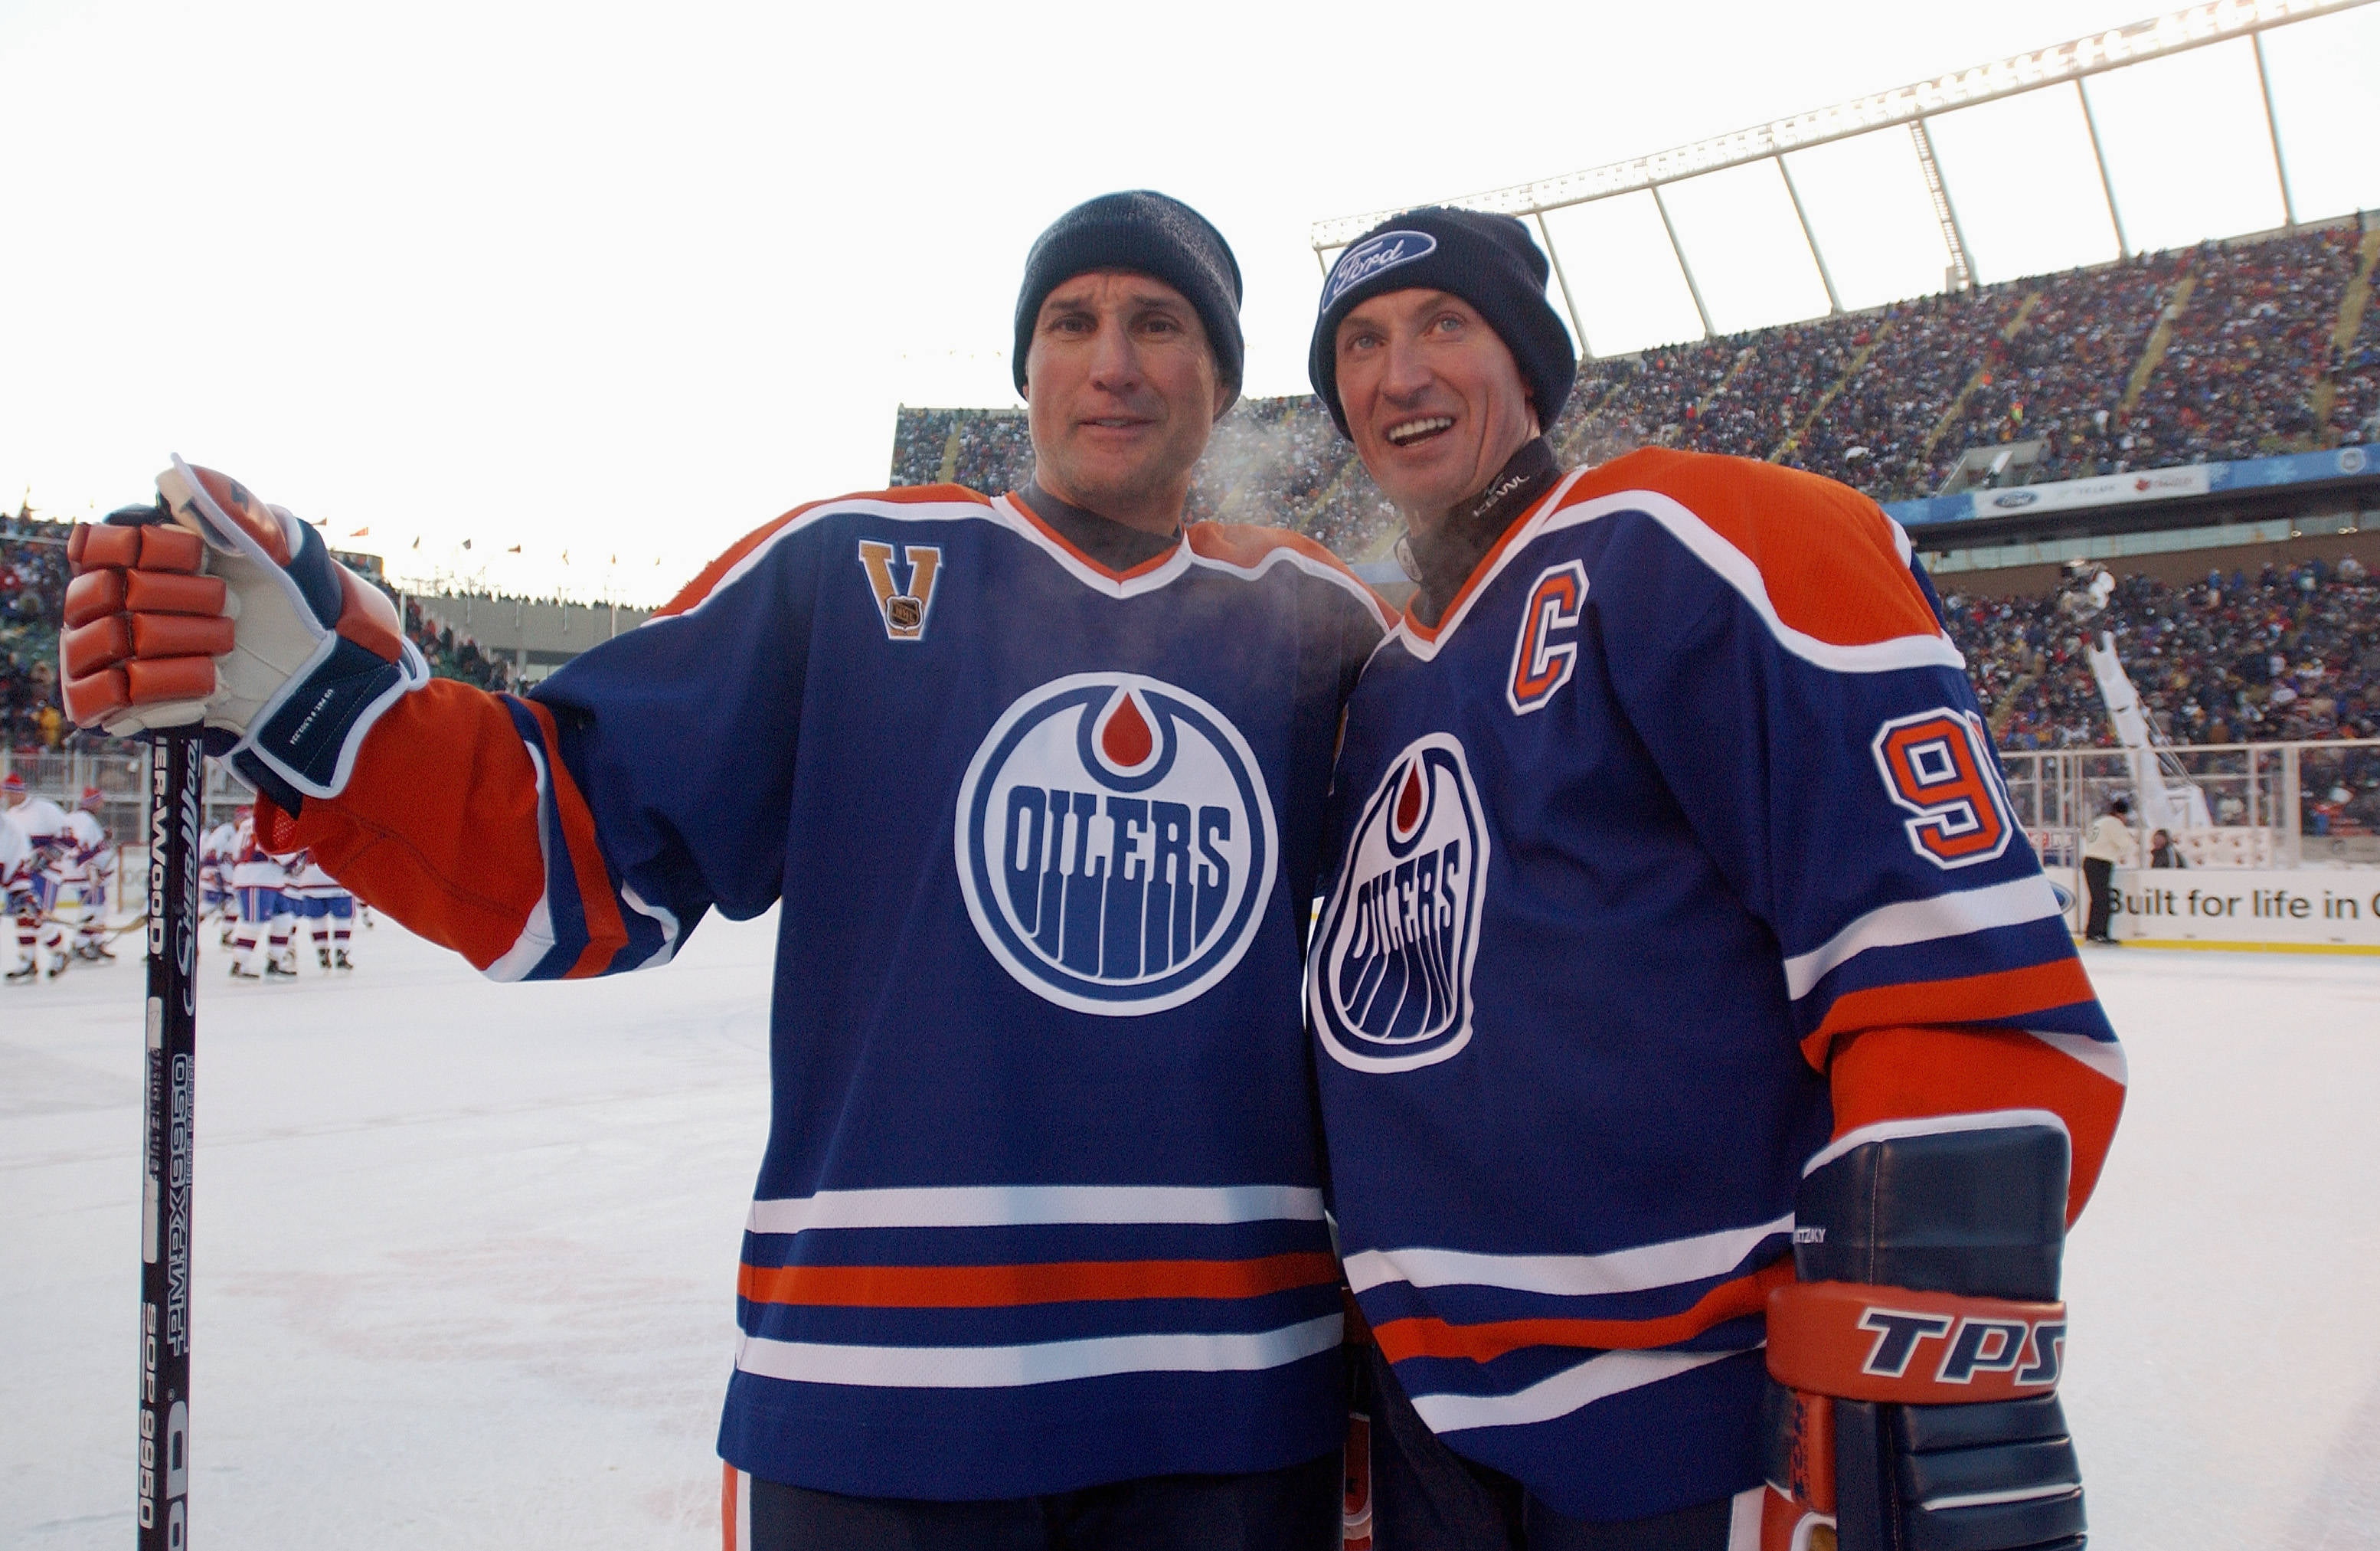 two Oilers hockey players standing on ice rink during daytime